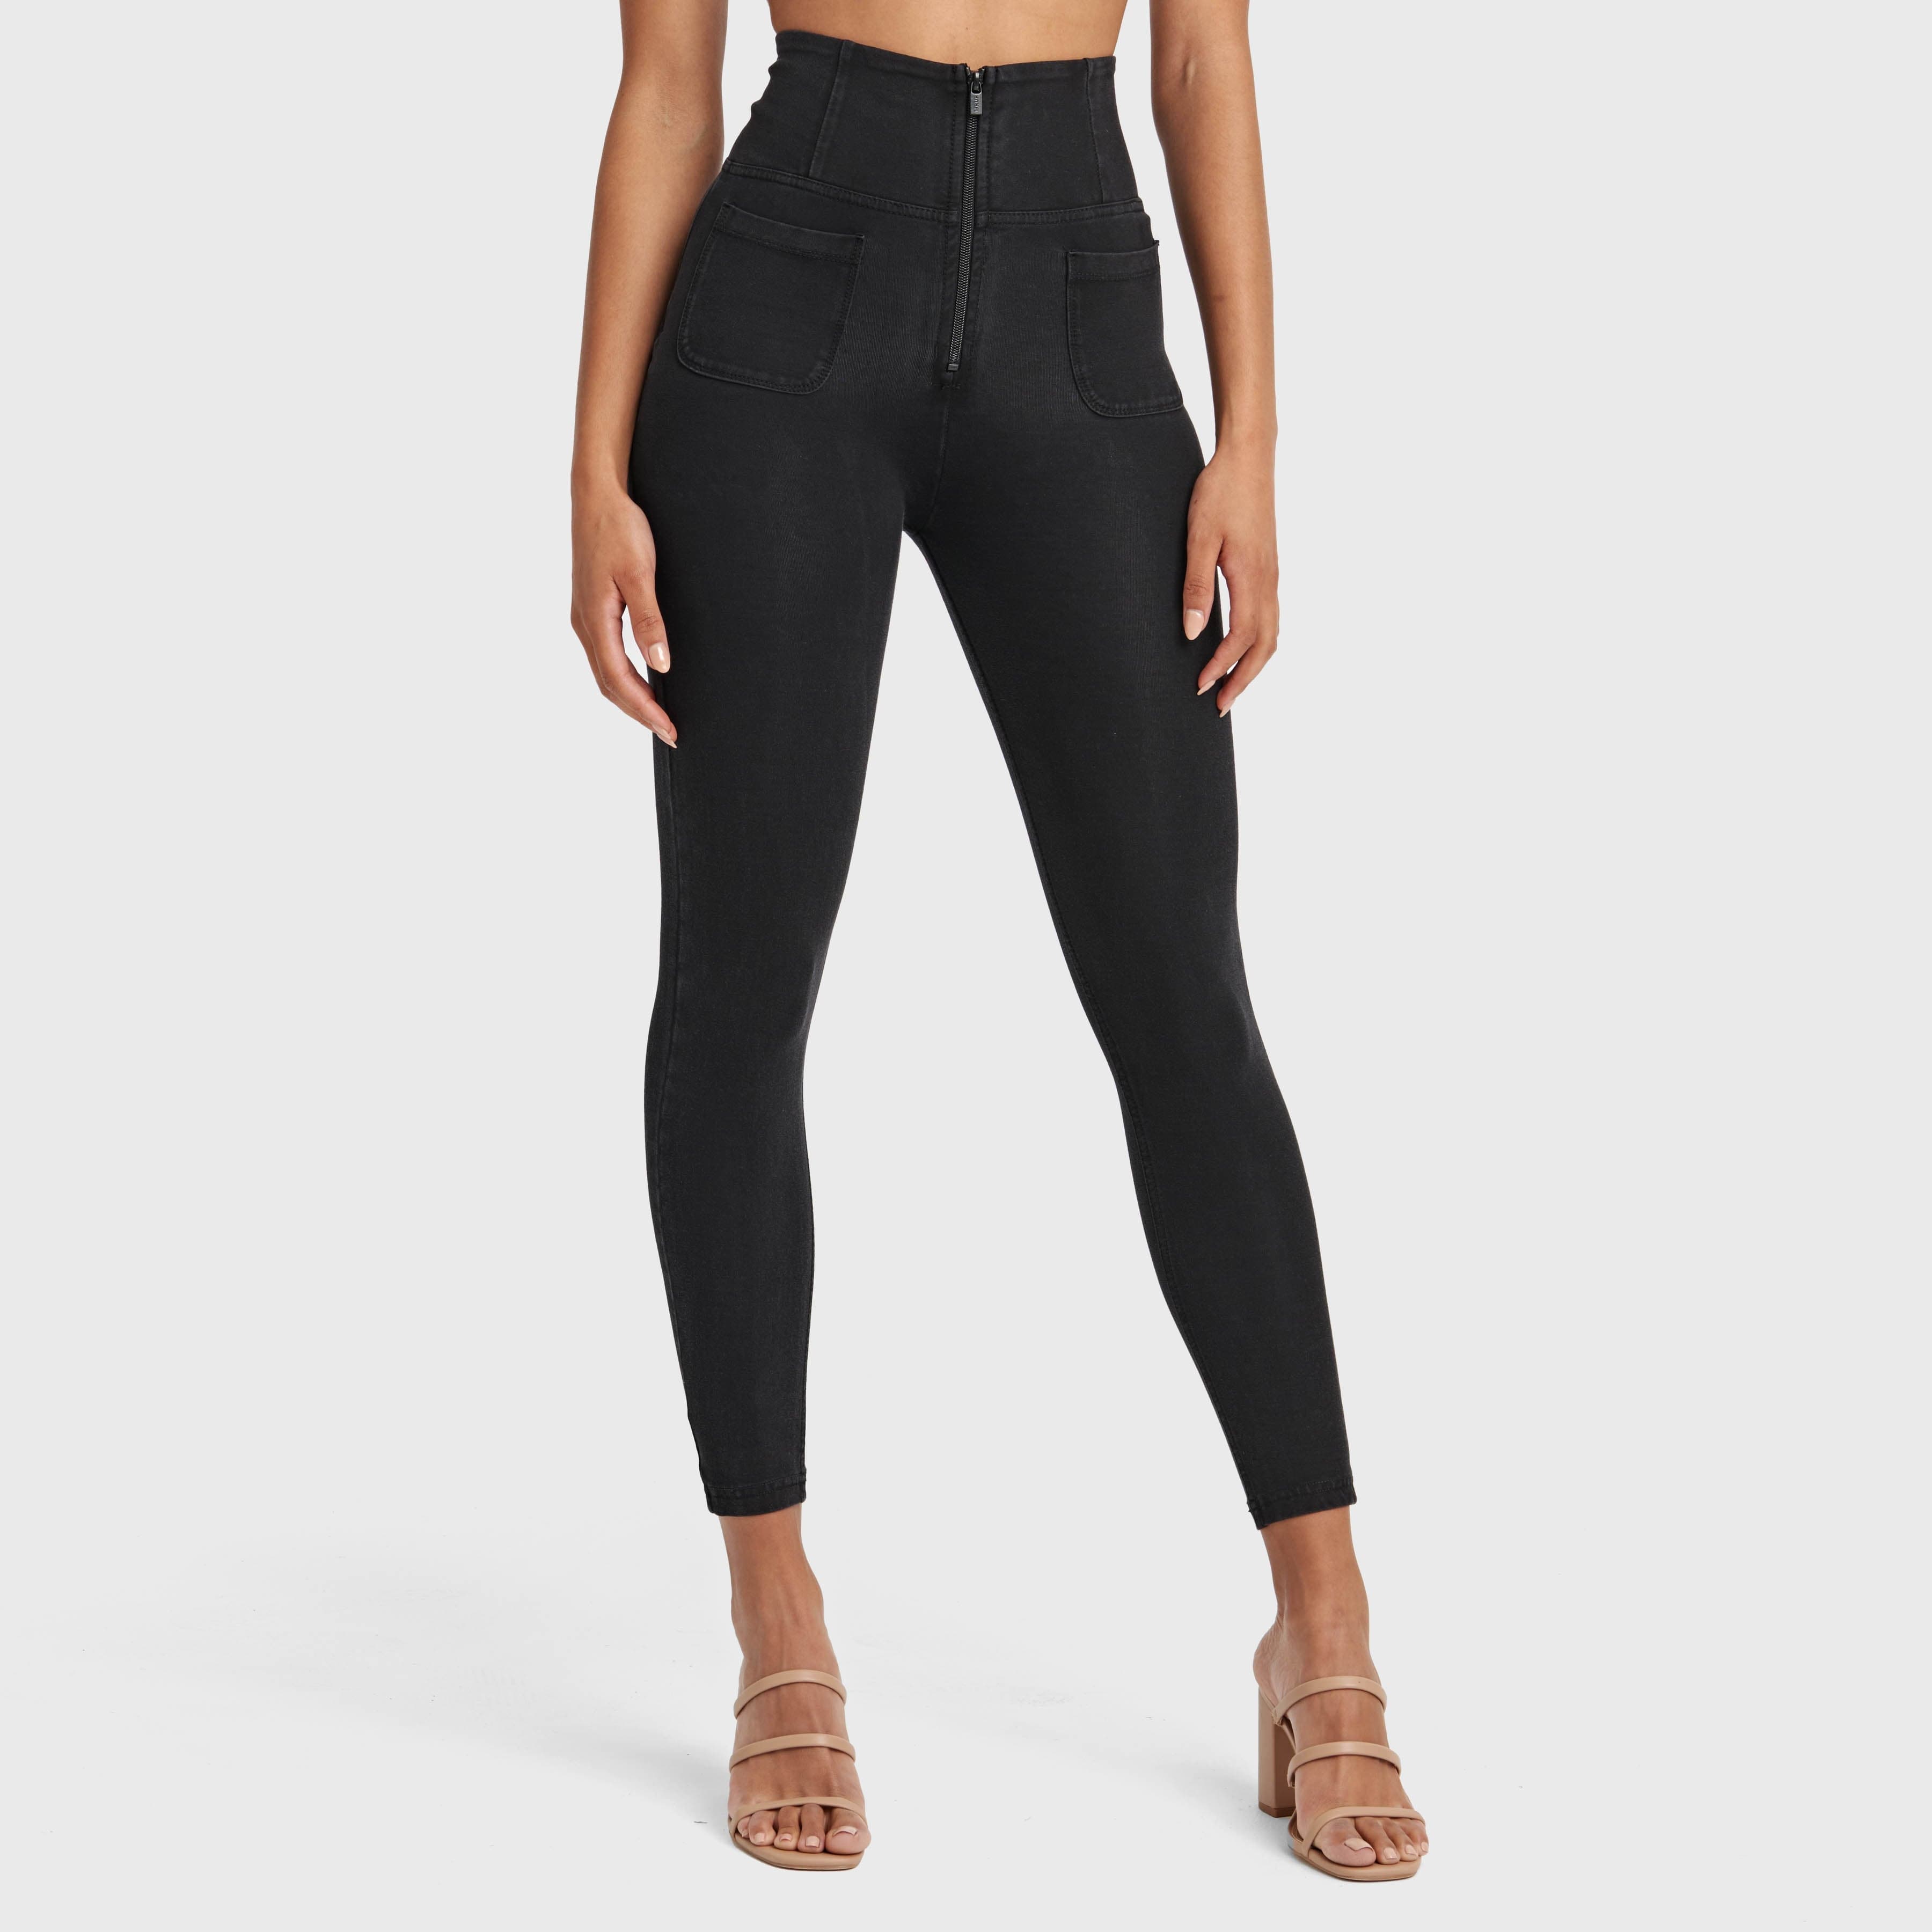 WR.UP® Denim With Front Pockets - Super High Waisted - Petite Length - Black + Black Stitching 1